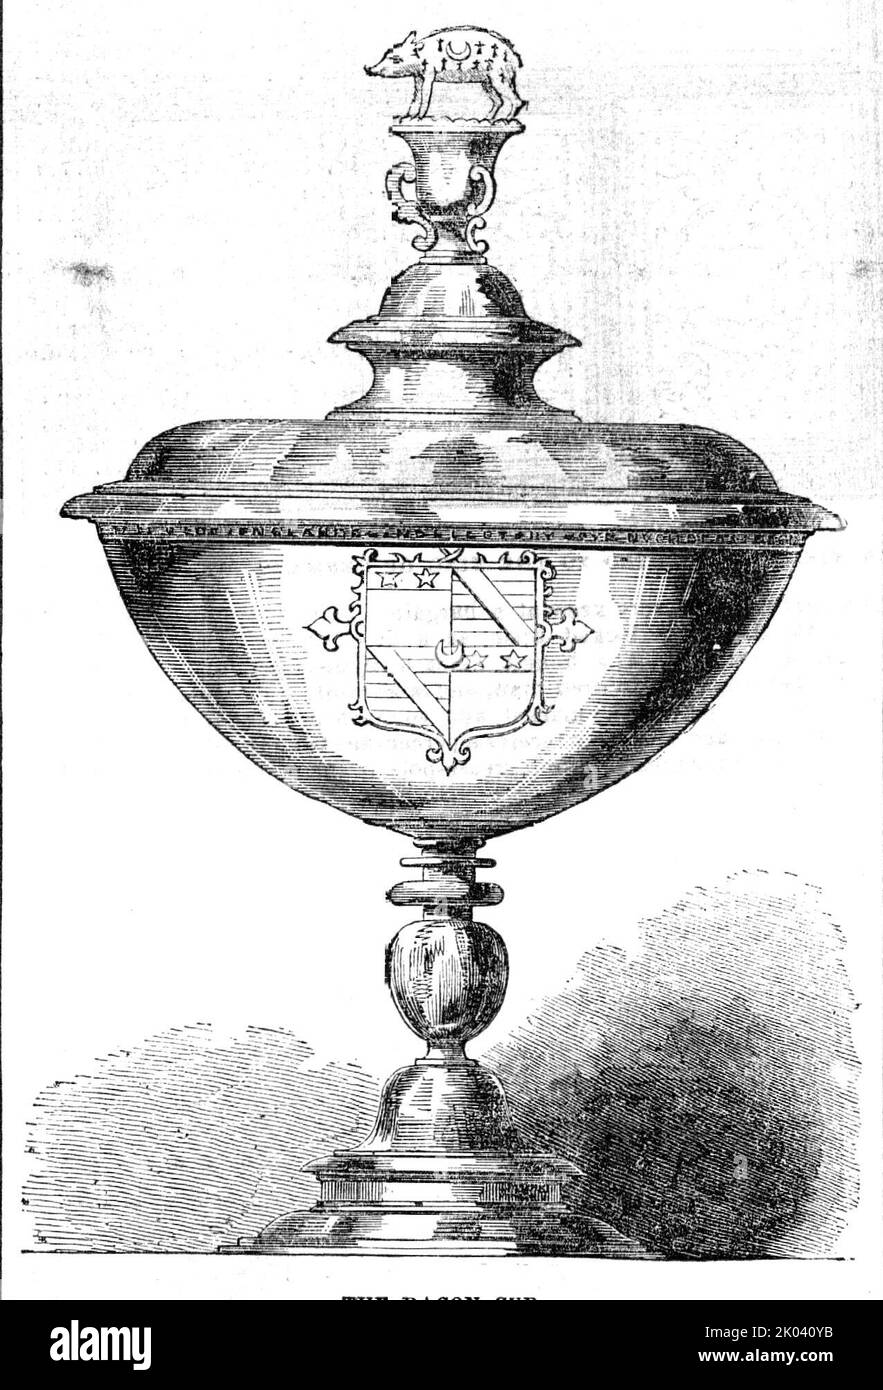 The Bacon Cup, 1854. 'This elegant and interesting relic of bygone times was made from the Great Seal of England for Sir Nicholas Bacon, knight, Lord Keeper, father of the great Lord Bacon. Sir Nicholas left this Cup, as an heirloom, to his second son, Sir Nathaniel Bacon, of Stiffkey (or, as it was anciently called, Stewkey), county Norfolk, KB., one of the most distinguished painters of his time. It is silver-gilt: its dimensions are eleven inches in height, and diameter of the bowl seven inches, and on it are engraved the arms of the Bacon family, and the following inscription: &quot;A thyr Stock Photo